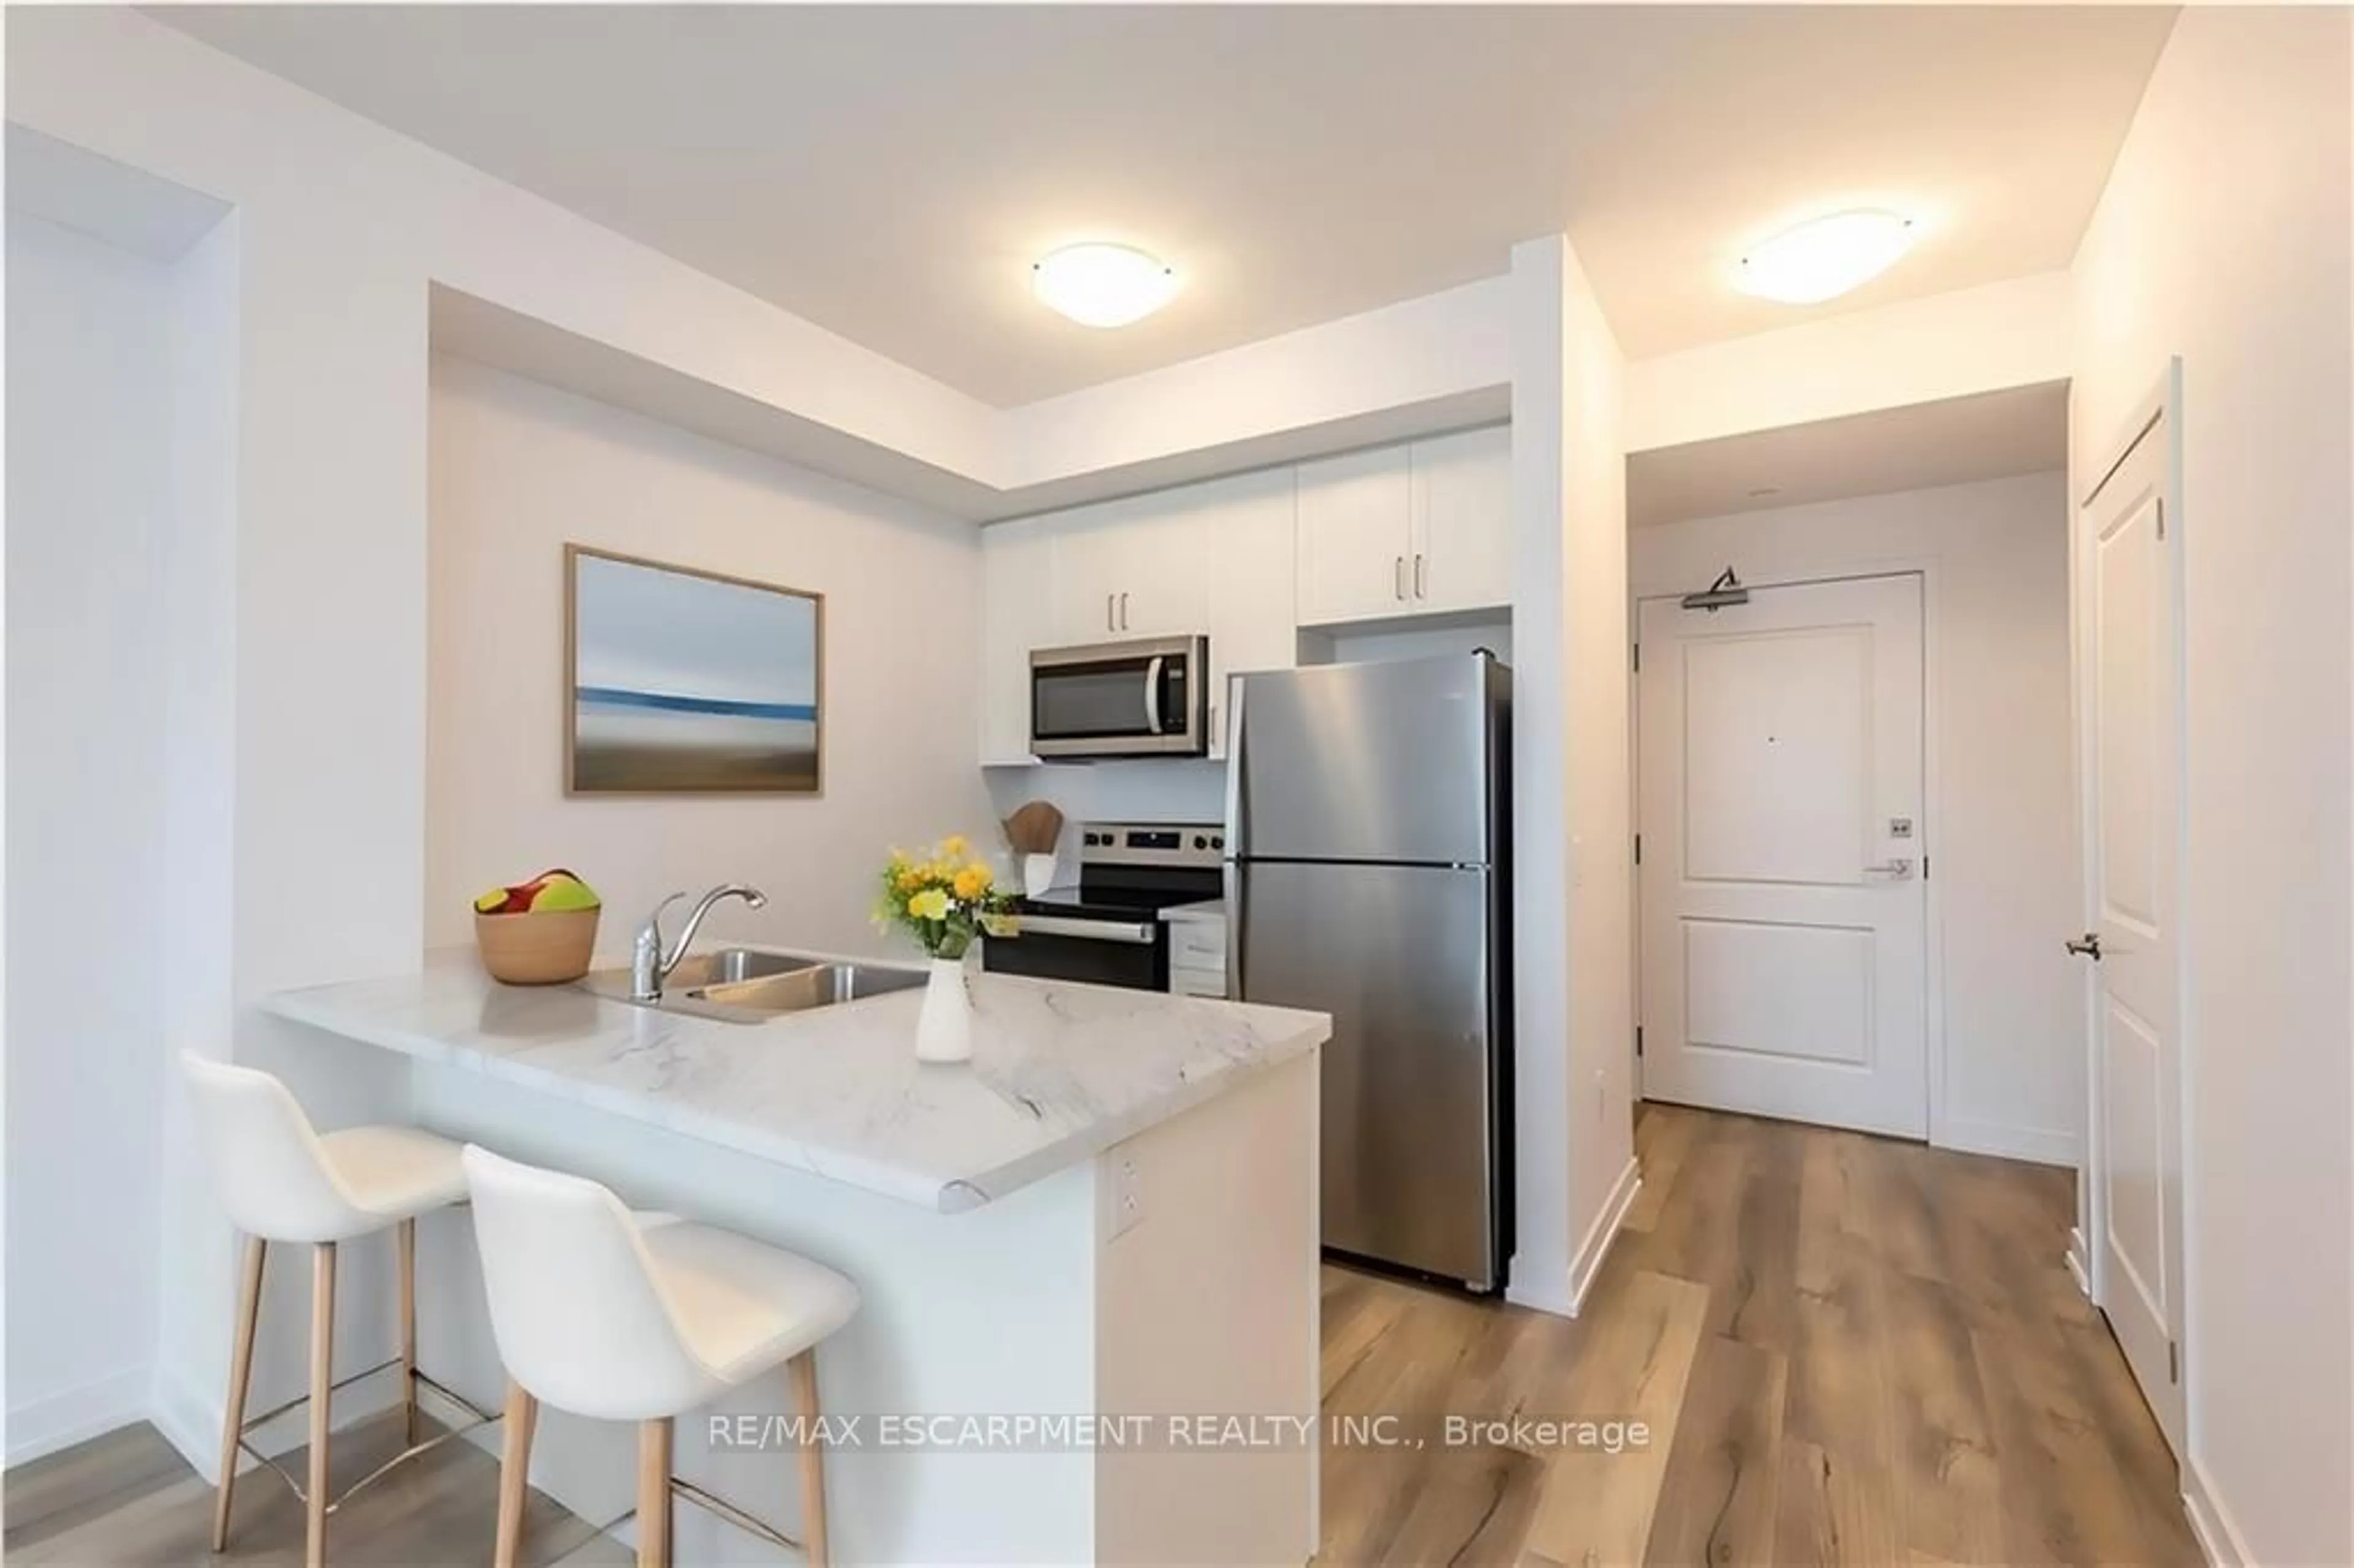 Standard kitchen for 5055 Greenlane Rd #417, Lincoln Ontario L0R 1B3